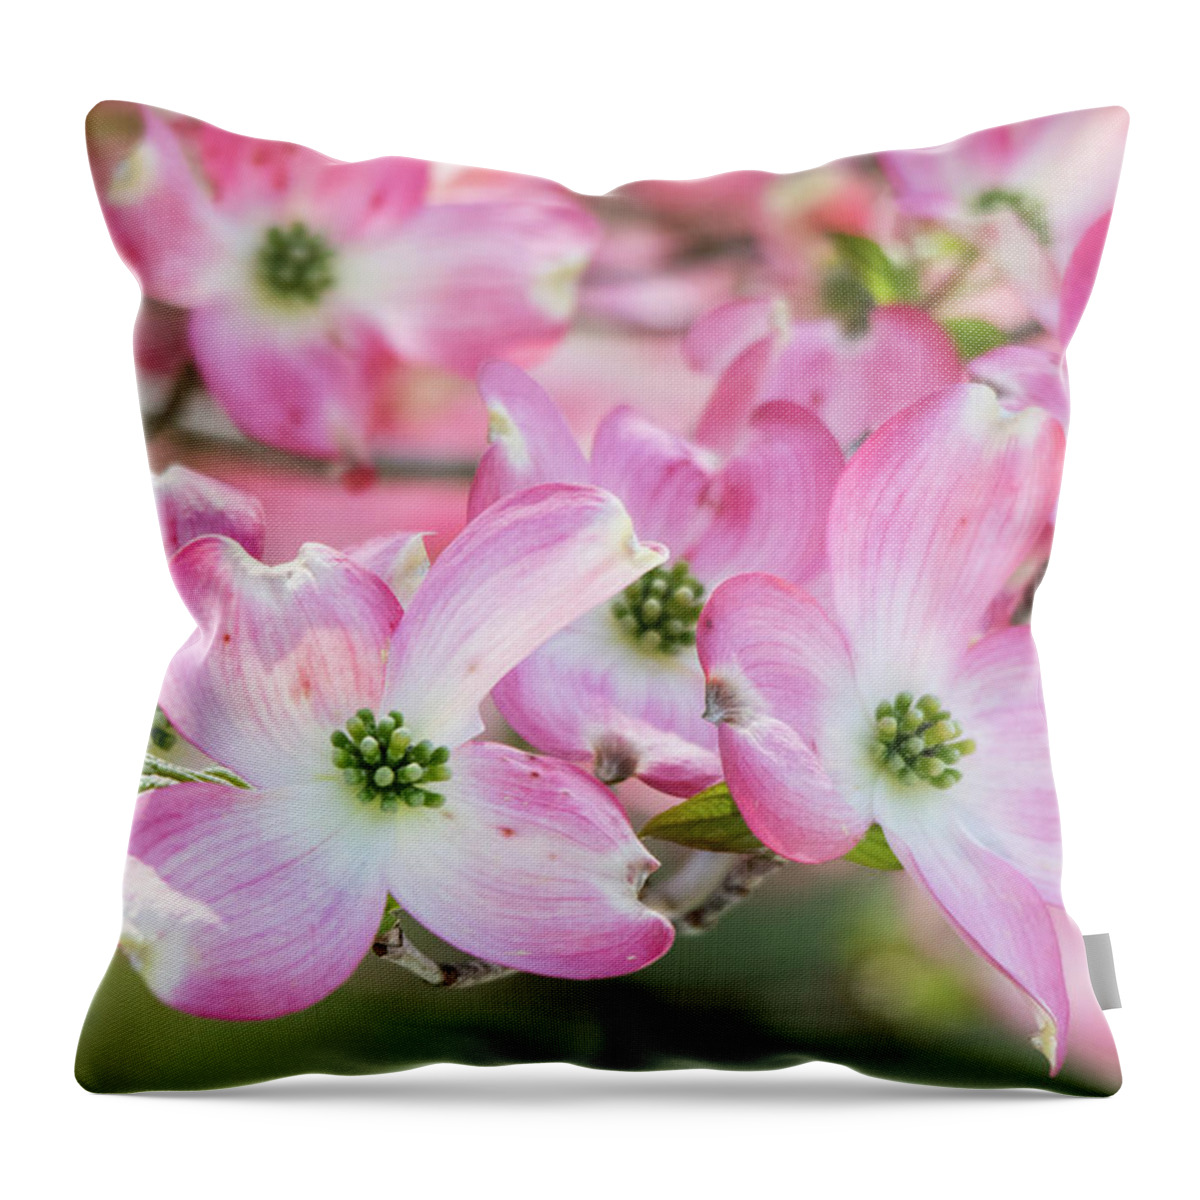 Pink Throw Pillow featuring the photograph Pink Dogwood Beauty by Mary Ann Artz